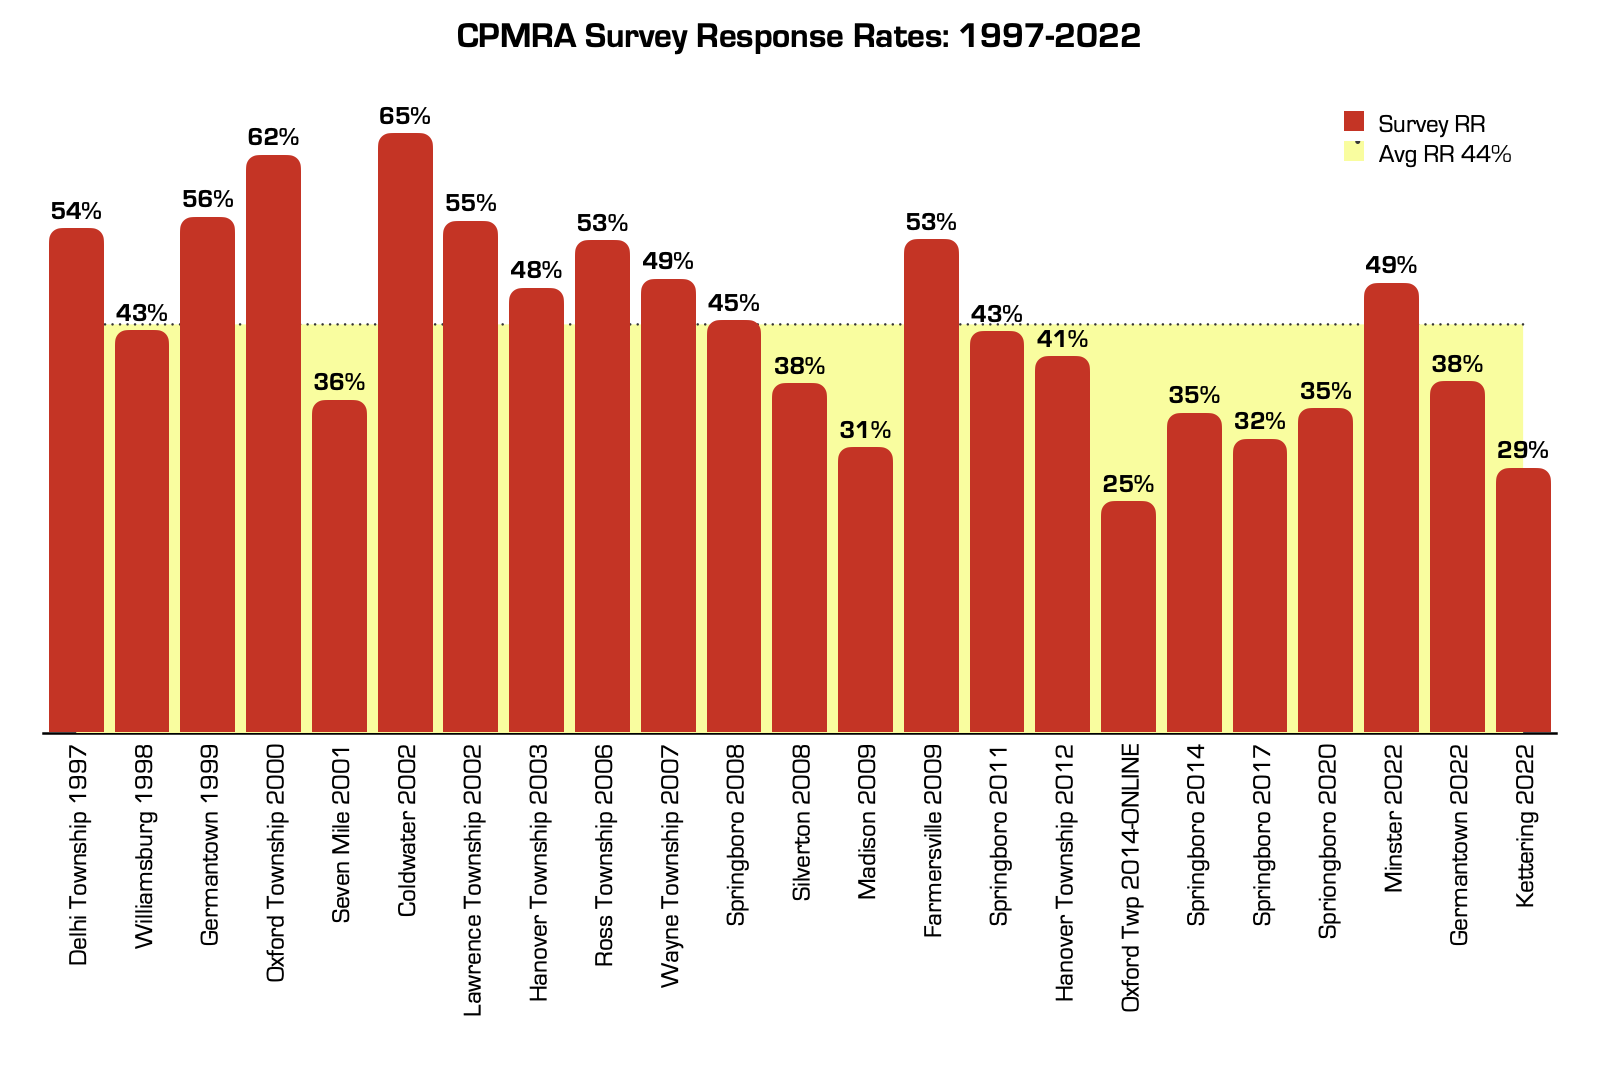 Chart featuring CPMRA Survey Response Rates from 1997 to 2022